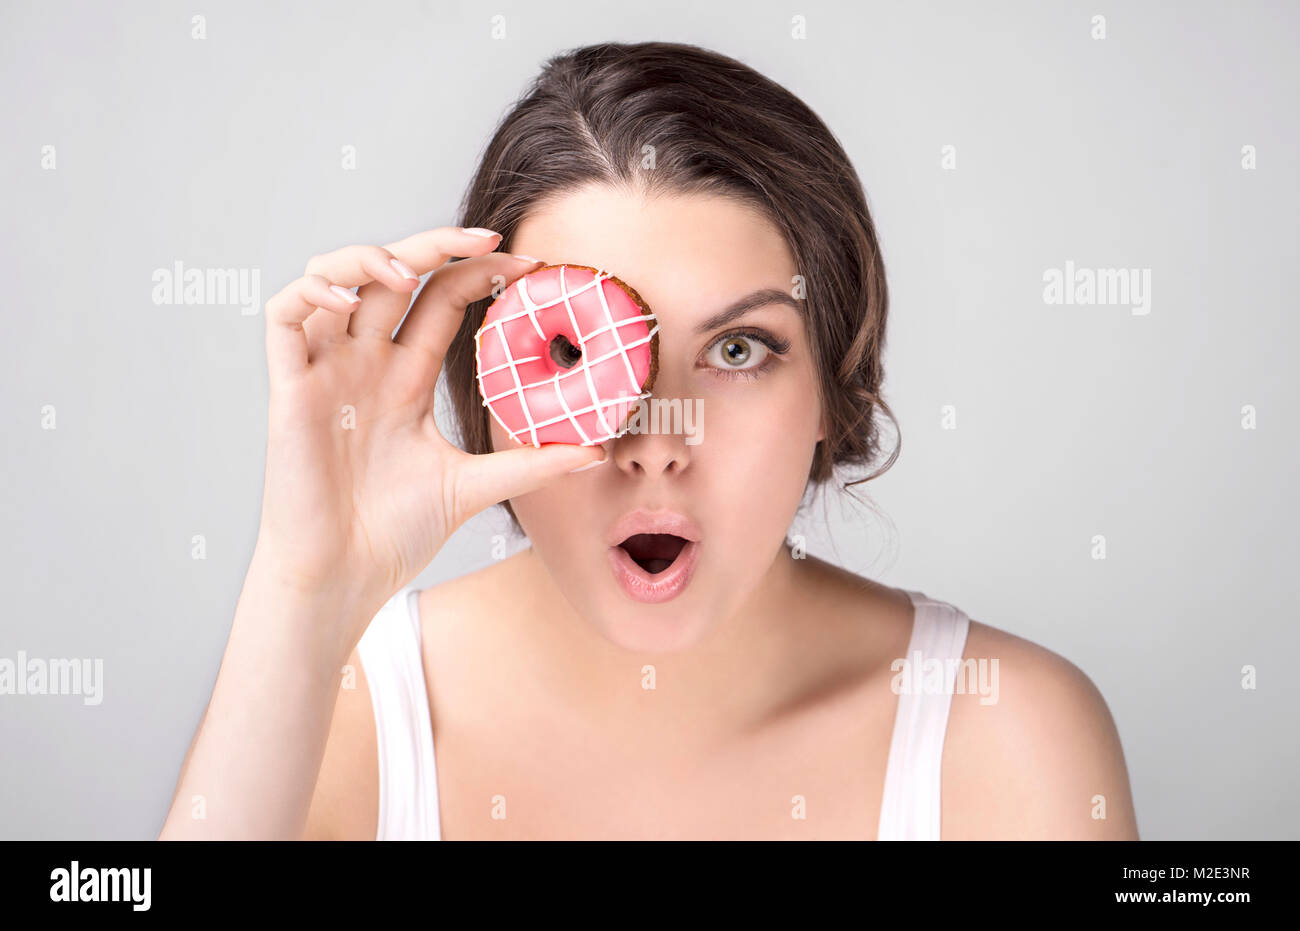 Surprised Caucasian woman holding donut over eye Stock Photo